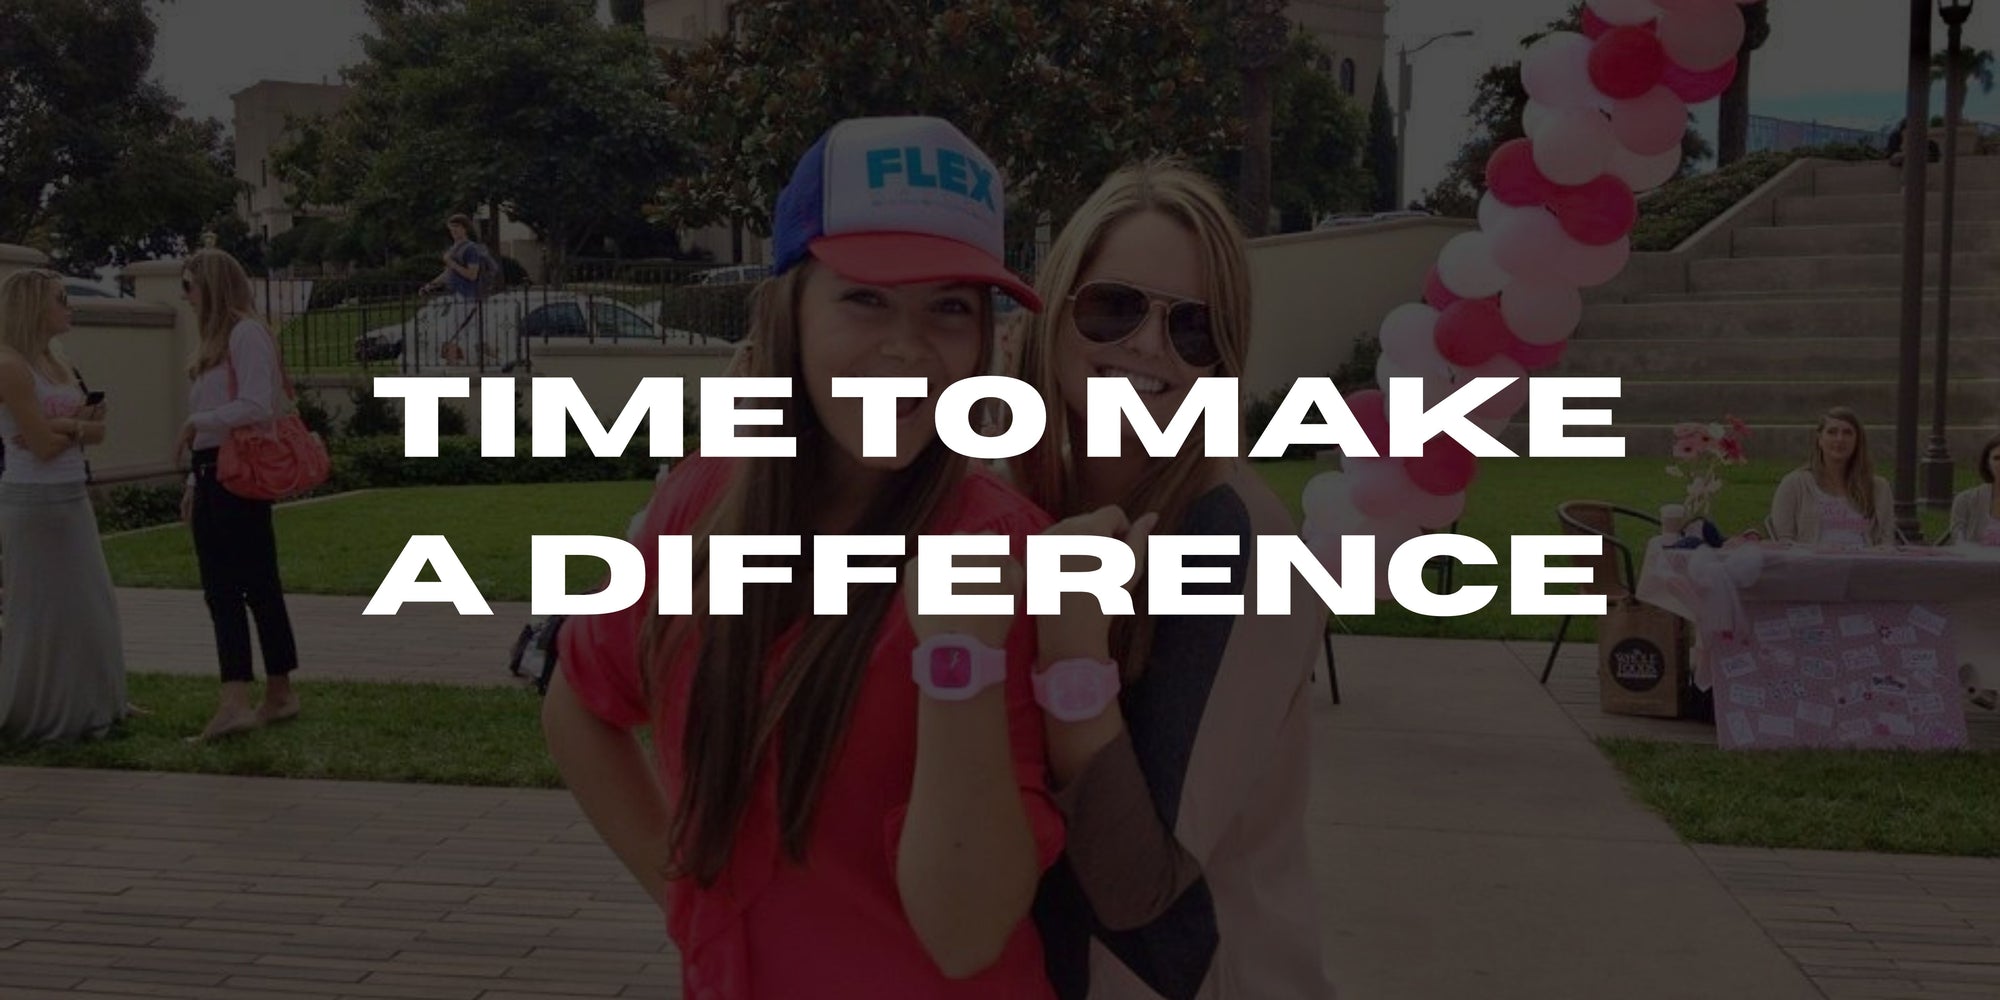 Time Well Spent: 3 Ways You Can Make a Difference in the World